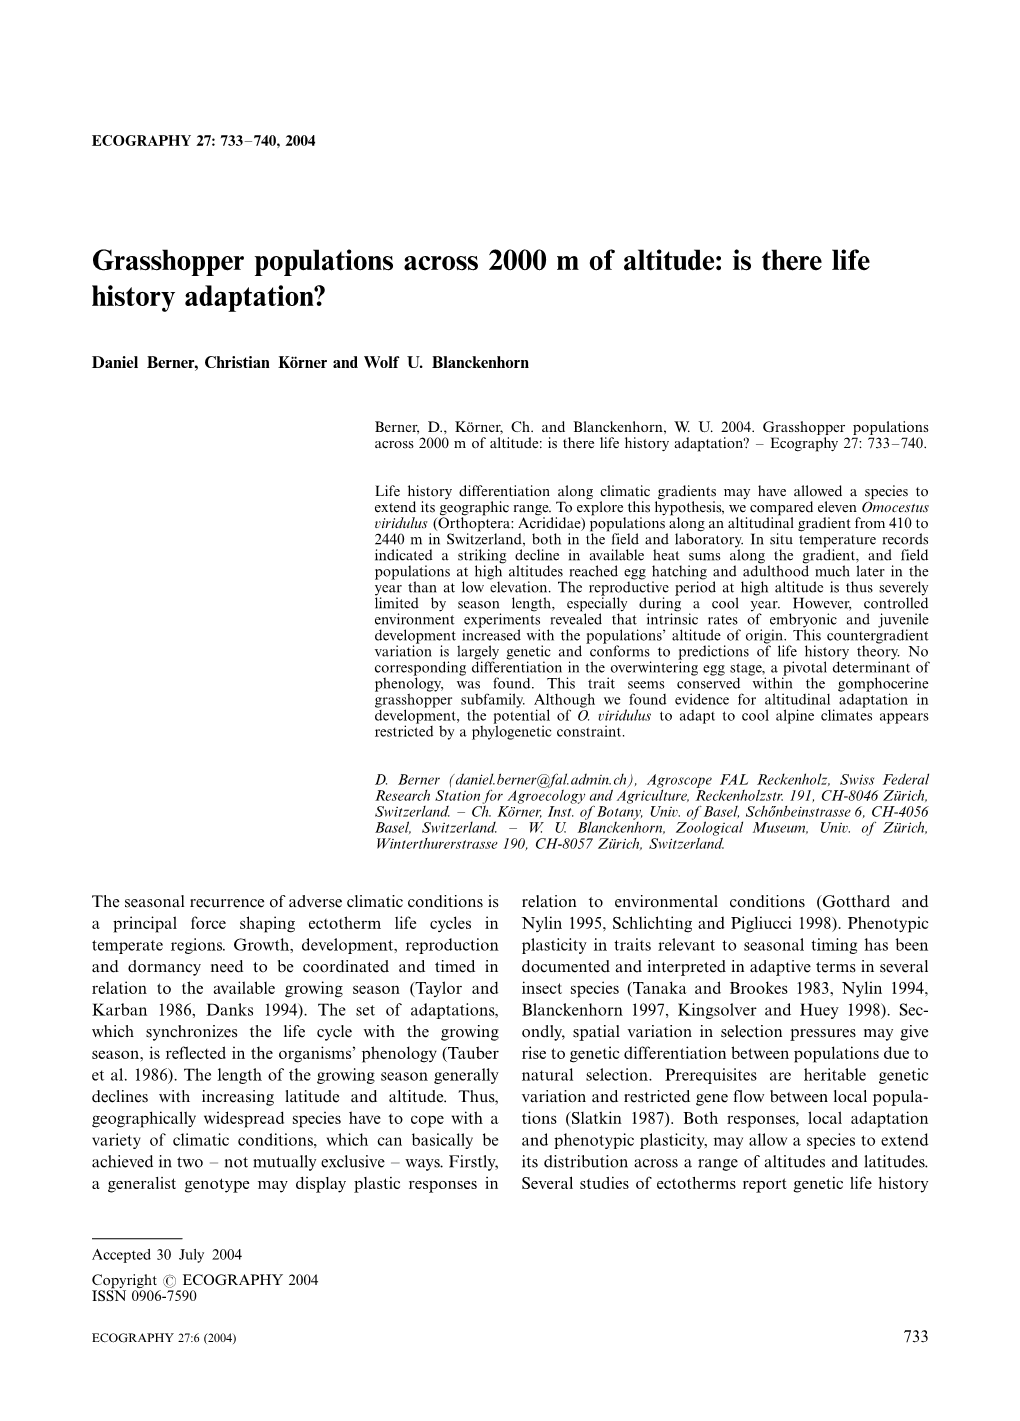 Grasshopper Populations Across 2000 M of Altitude: Is There Life History Adaptation?